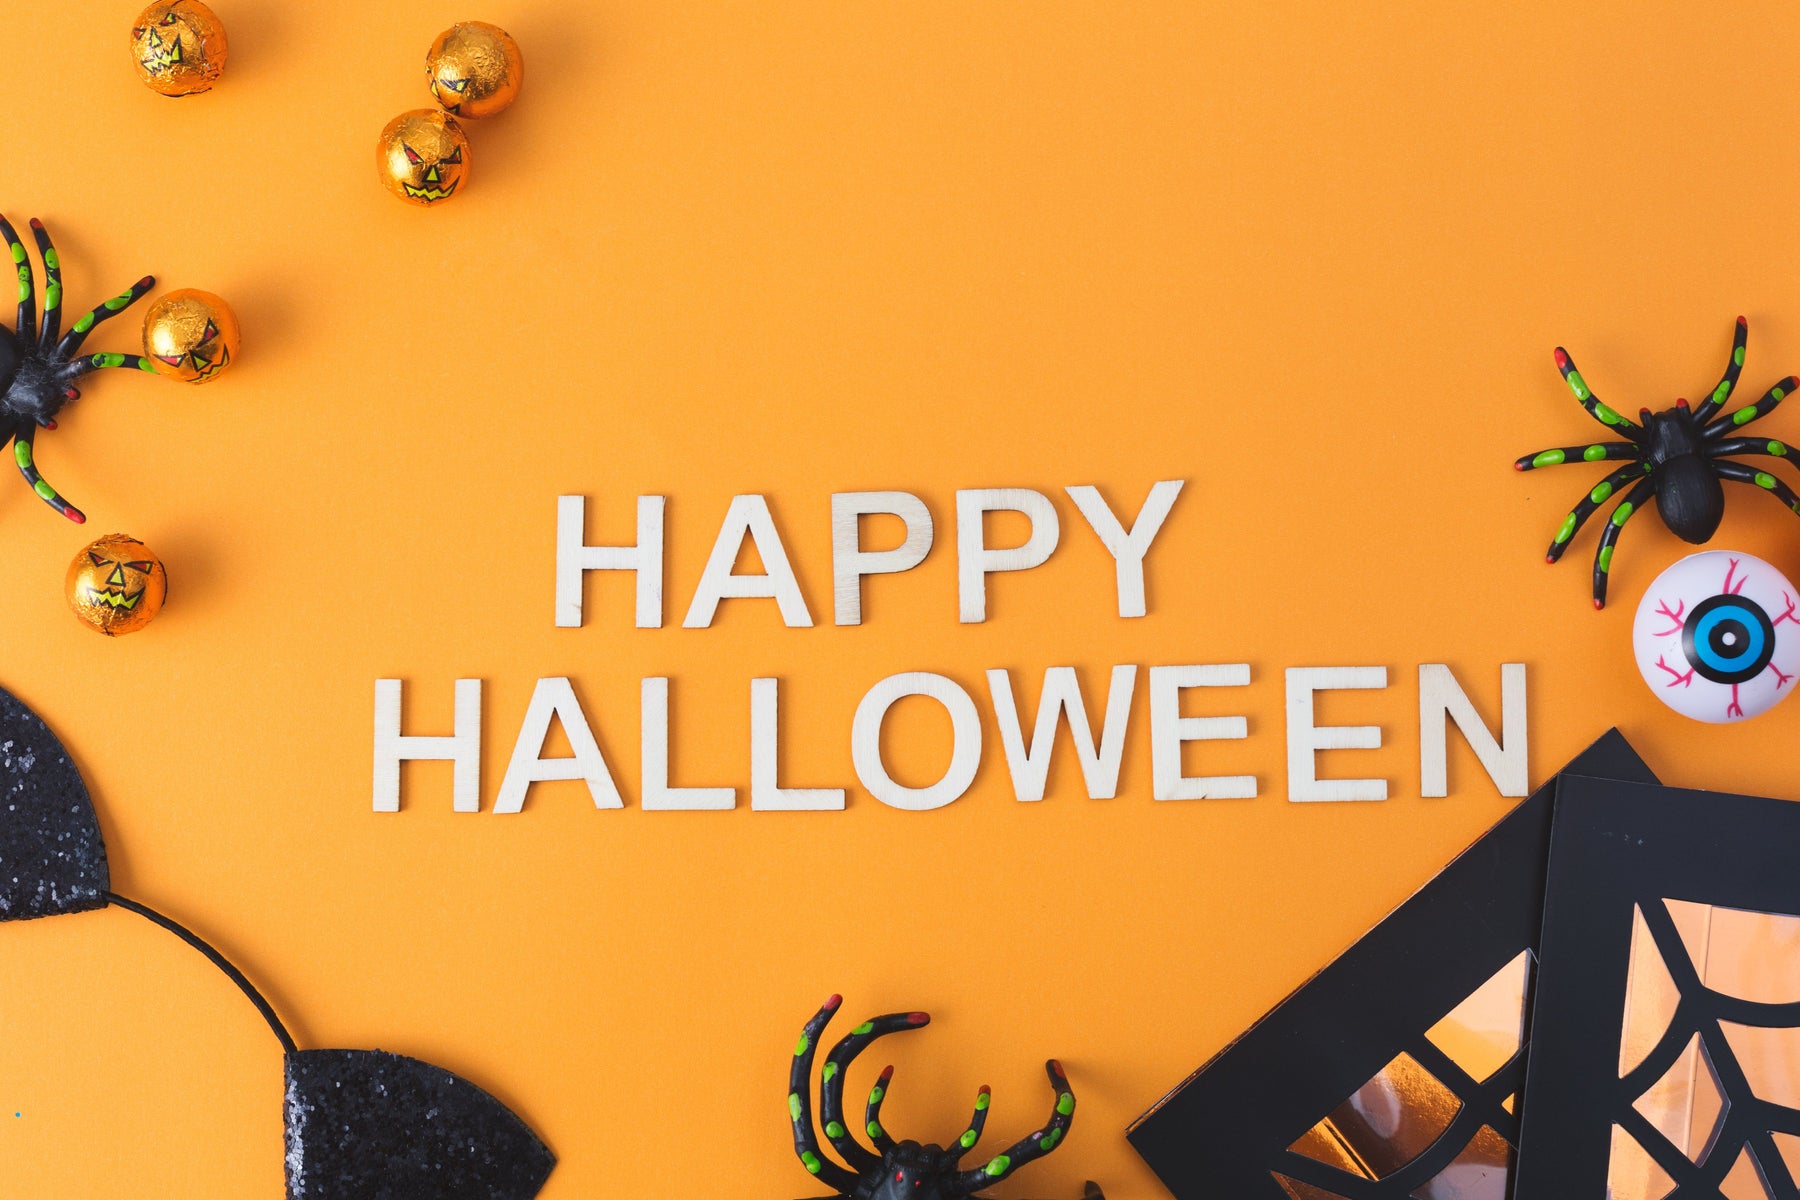 🎁 Happy Halloween Promotion! 10% discount + DHL Free!